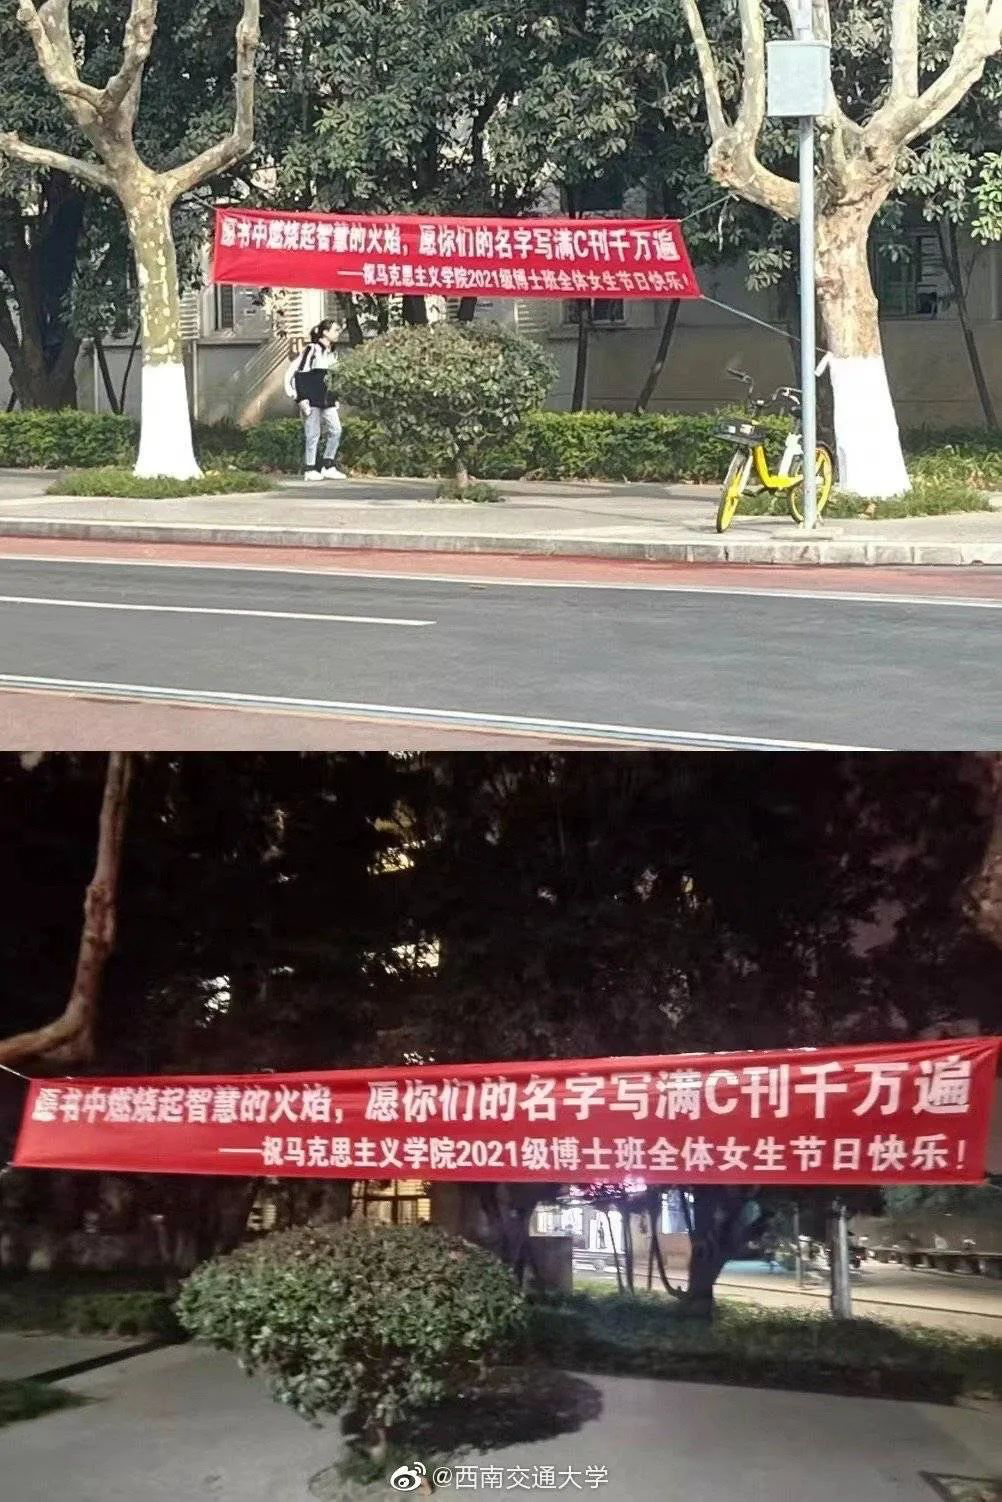 There are two photos of this red banner, which is hung between two trees along a campus road. The first photo is taken from a distance during the day; the second is a close-up of the banner, taken at night.